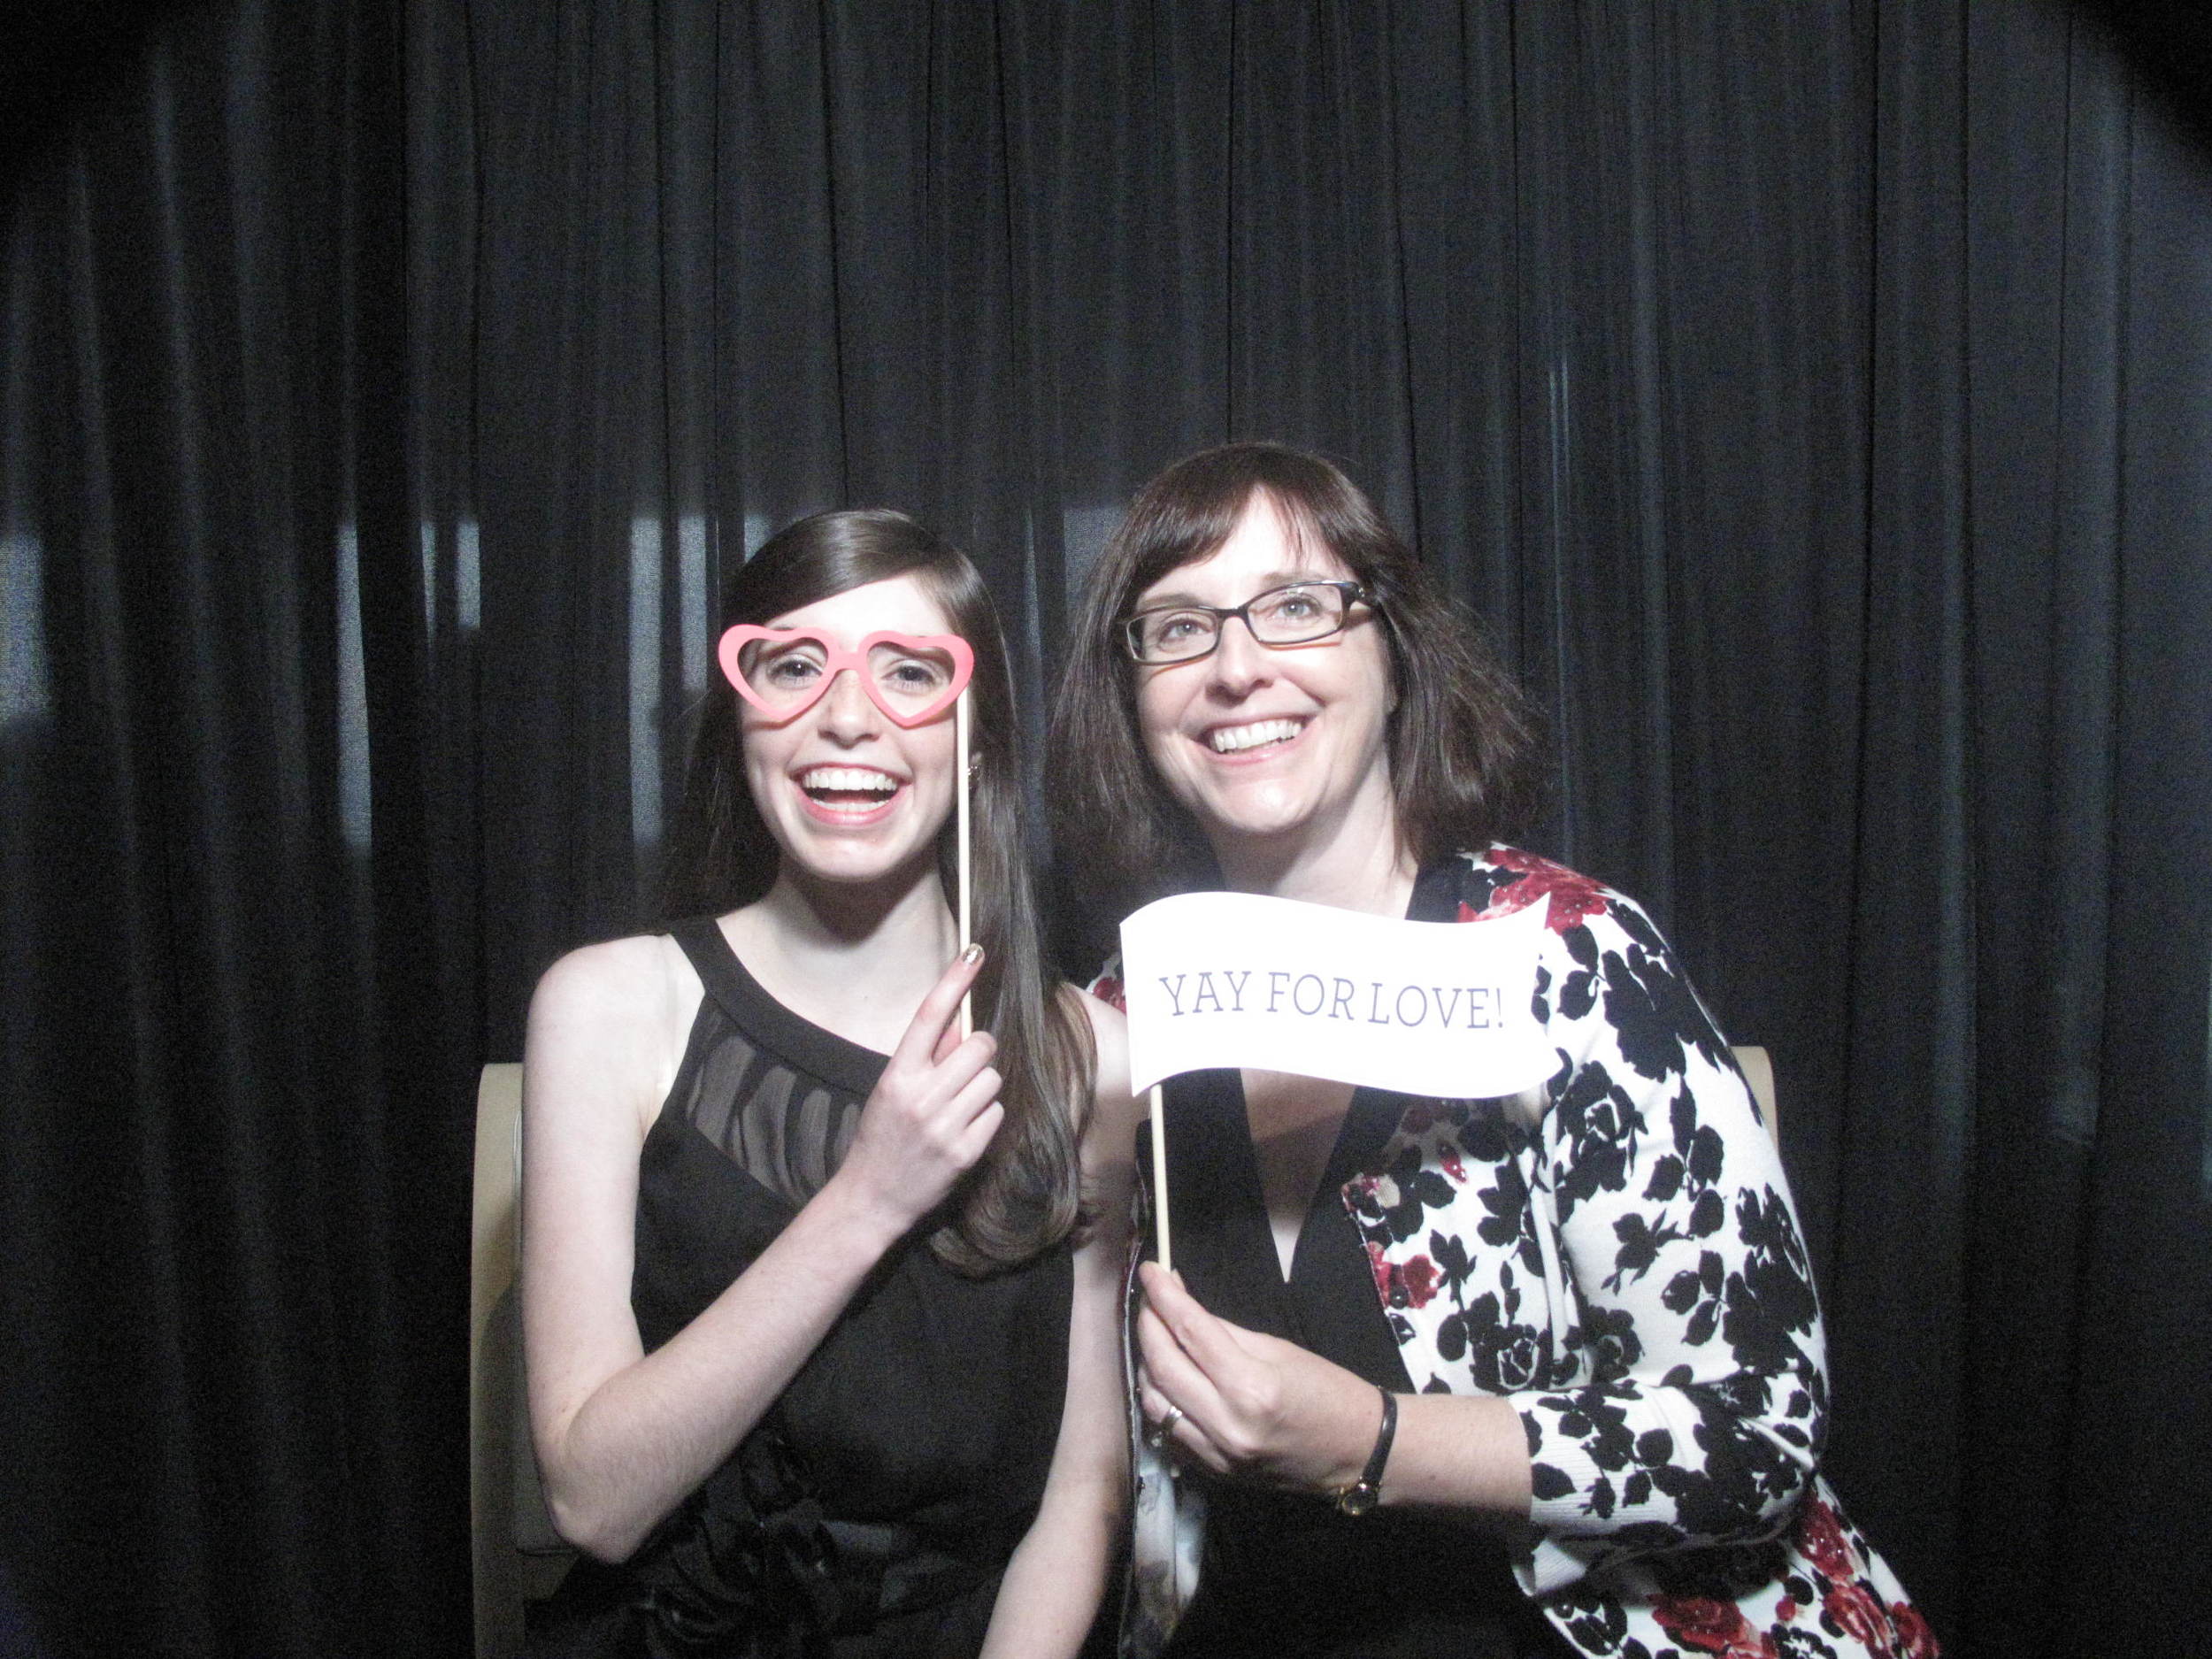 Snapshot Photobooths at McLoone's Pier House in Long Branch, New Jersey